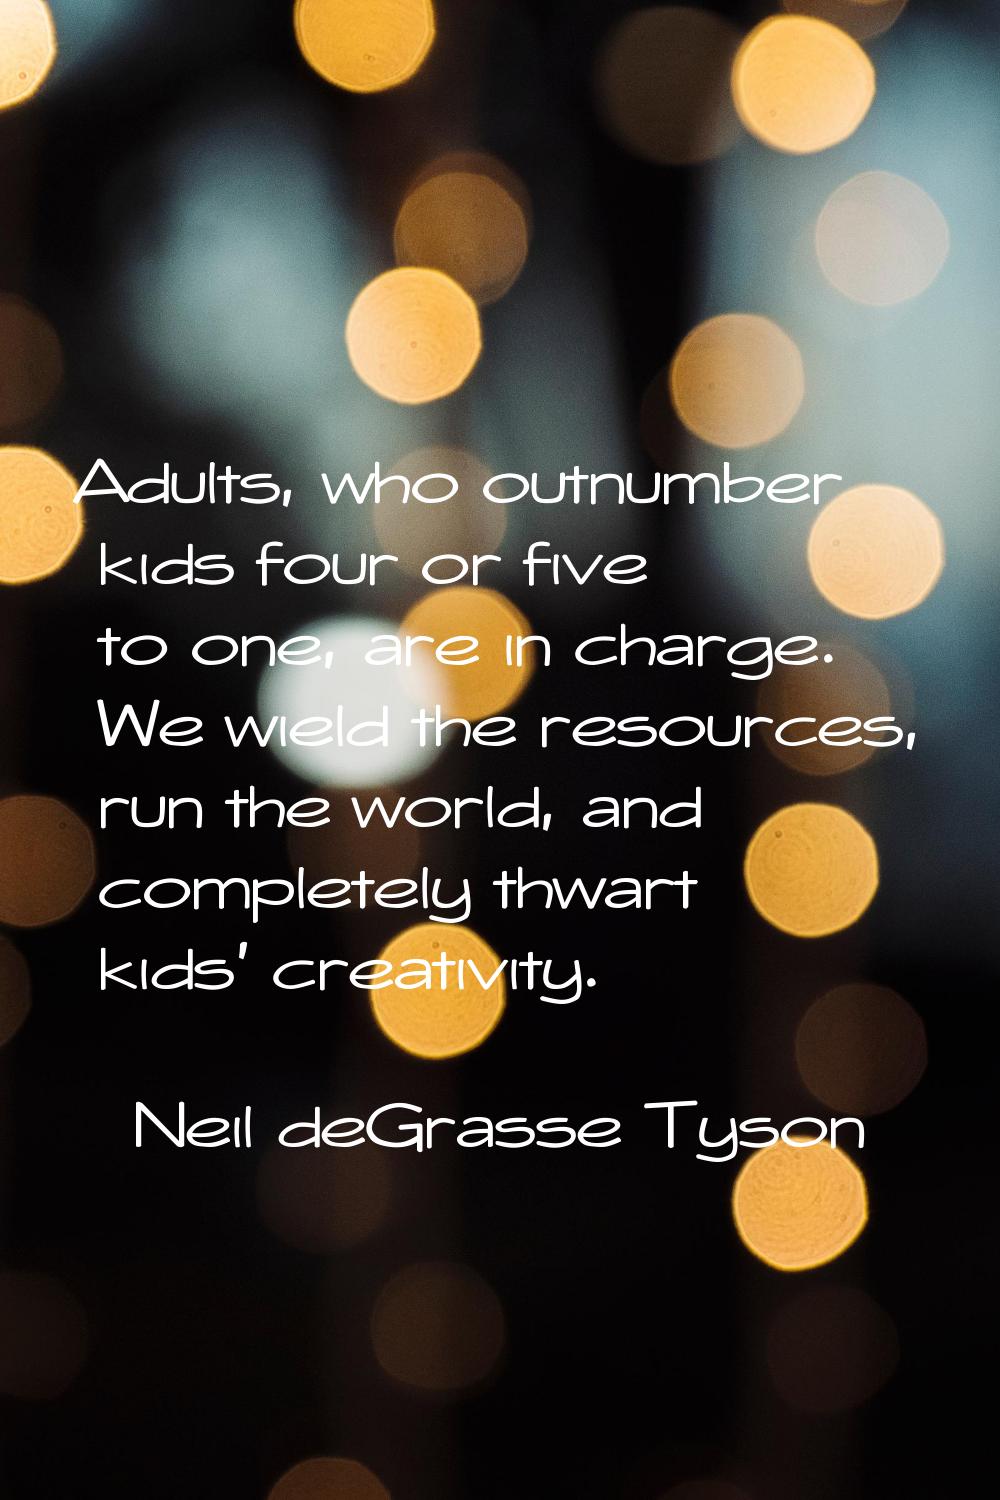 Adults, who outnumber kids four or five to one, are in charge. We wield the resources, run the worl